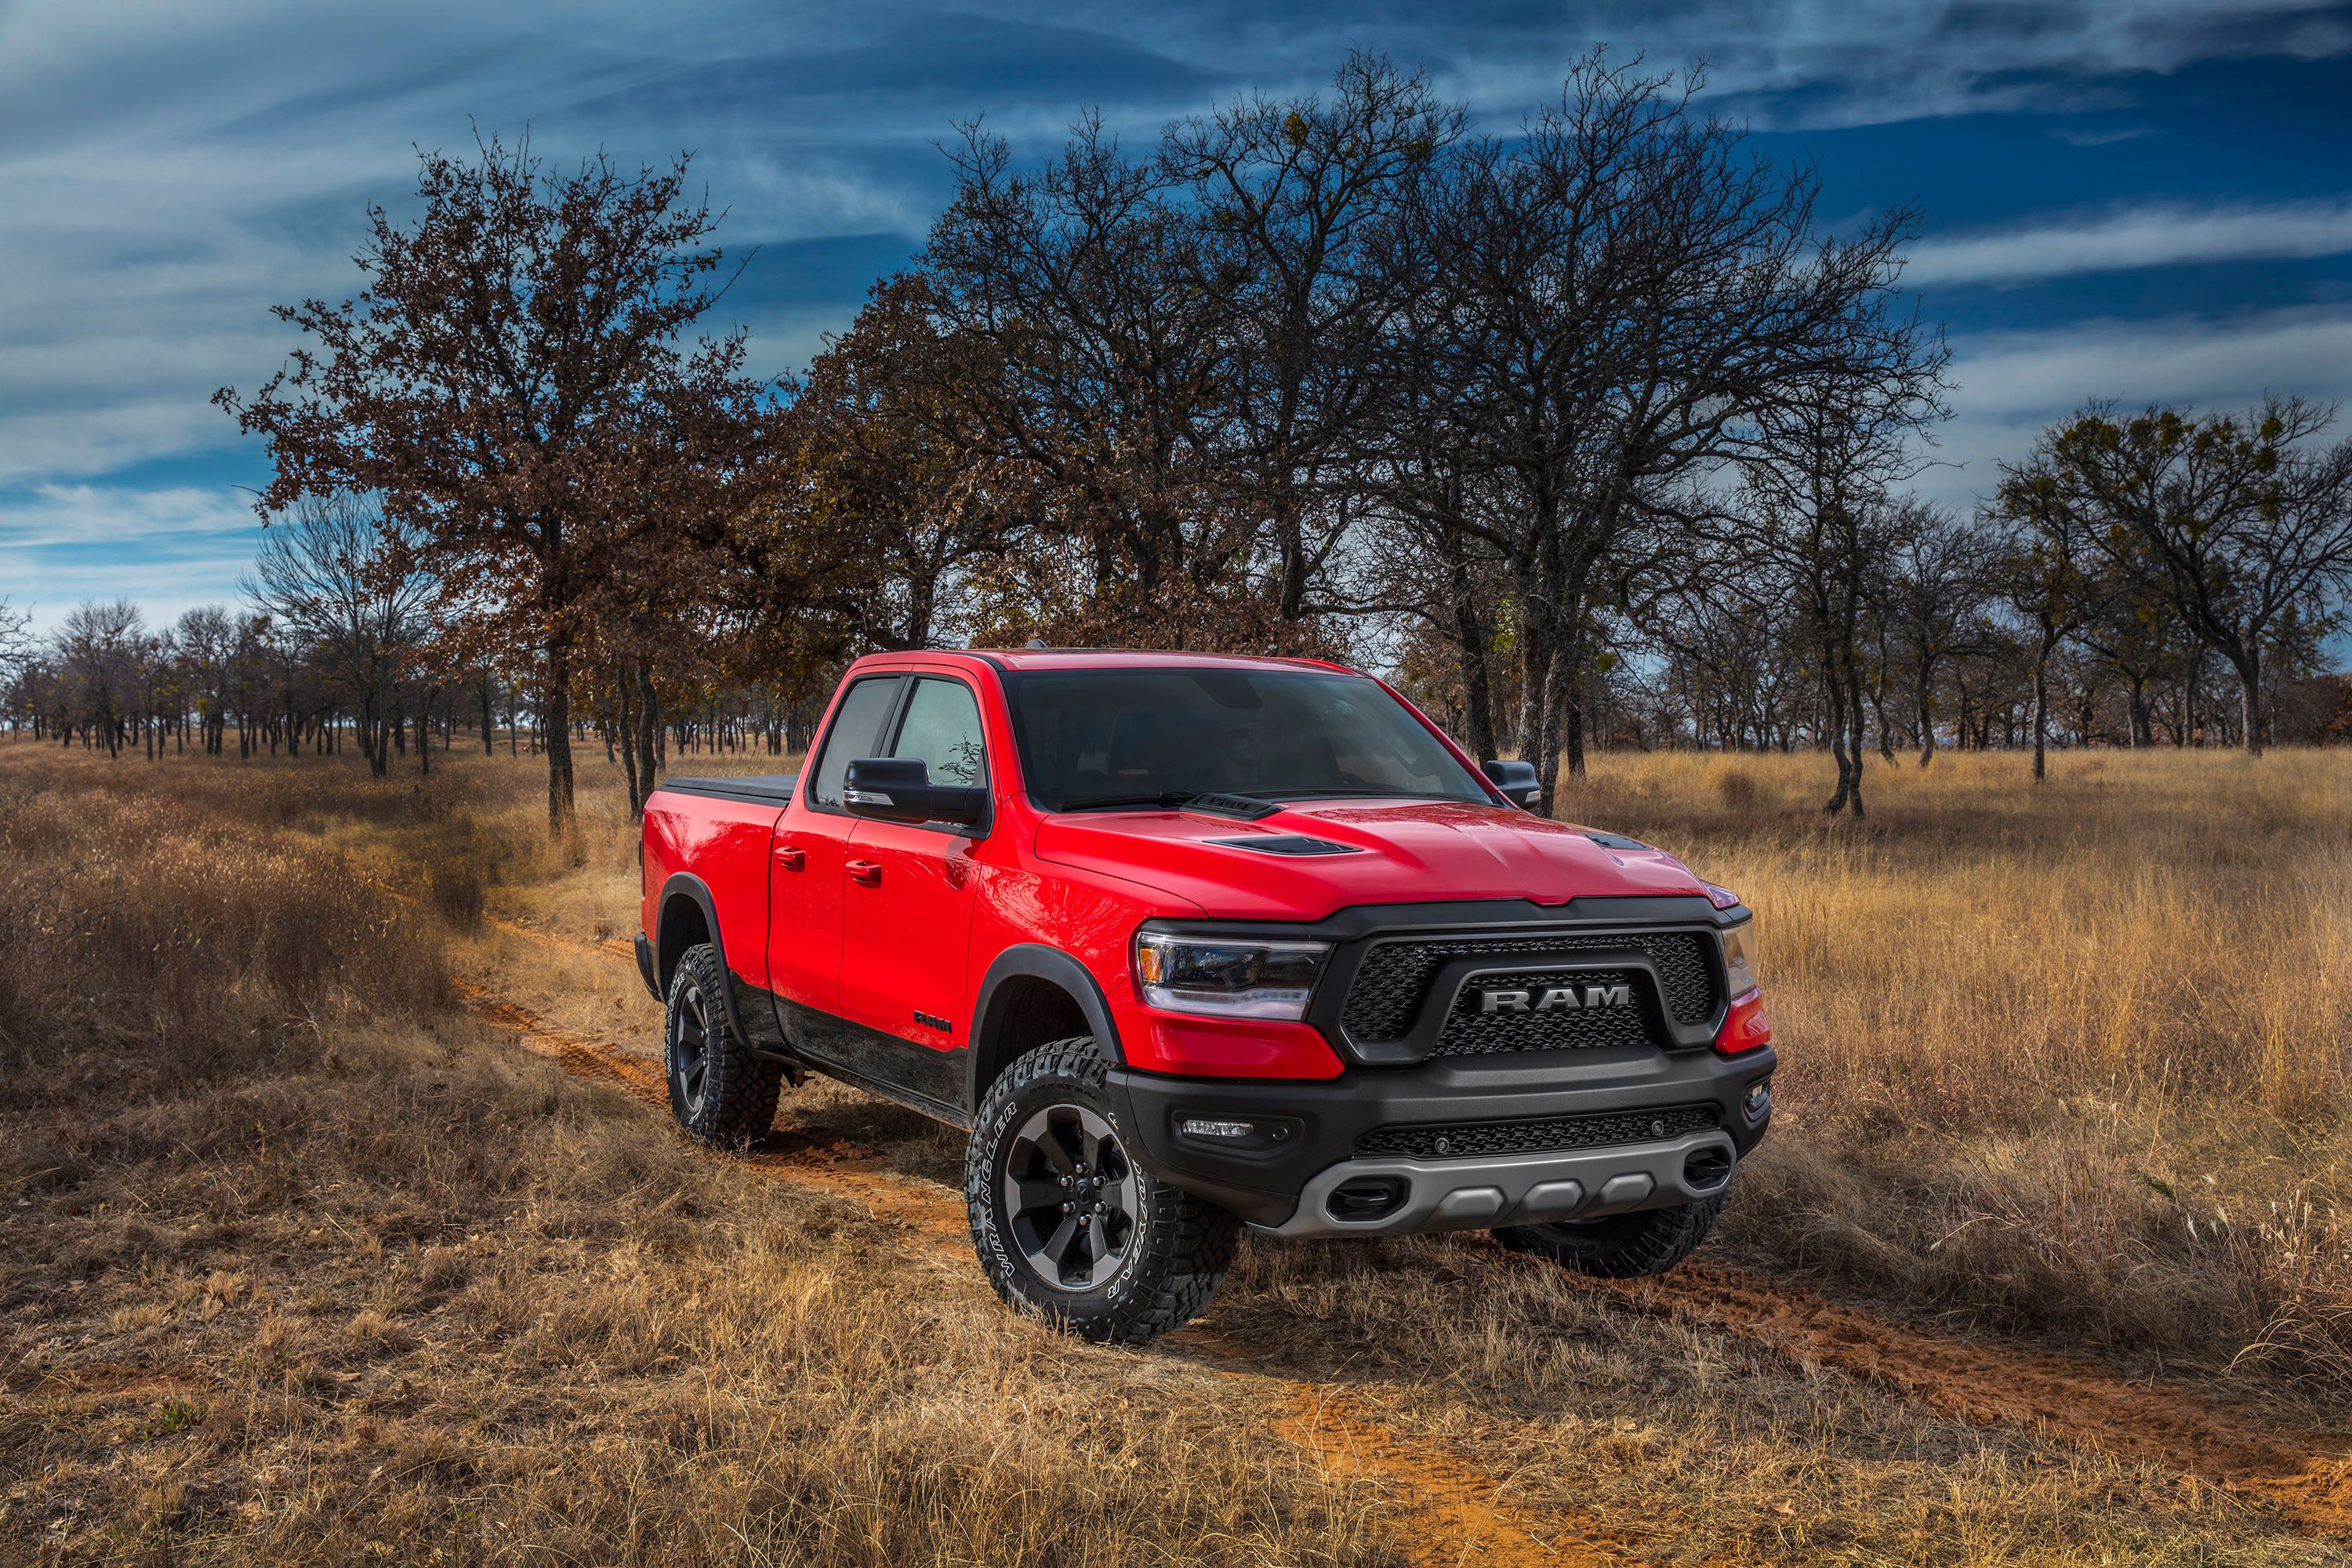 2021 Is Ram Working On An Electric 1500 Pickup Truck?